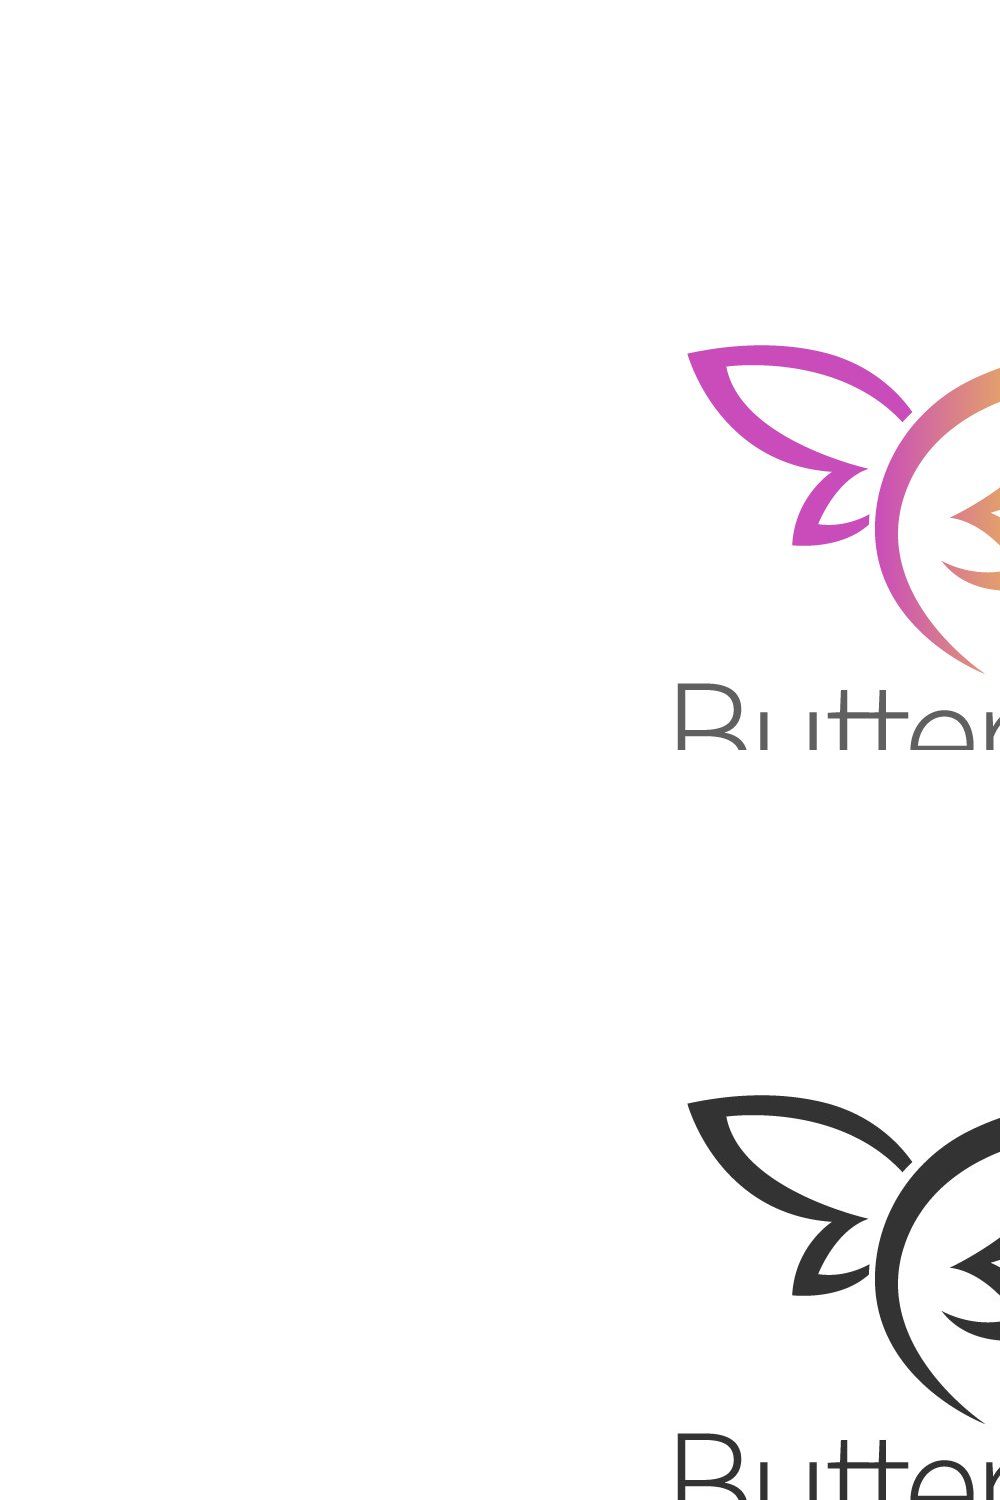 Butterfly logo pinterest preview image.